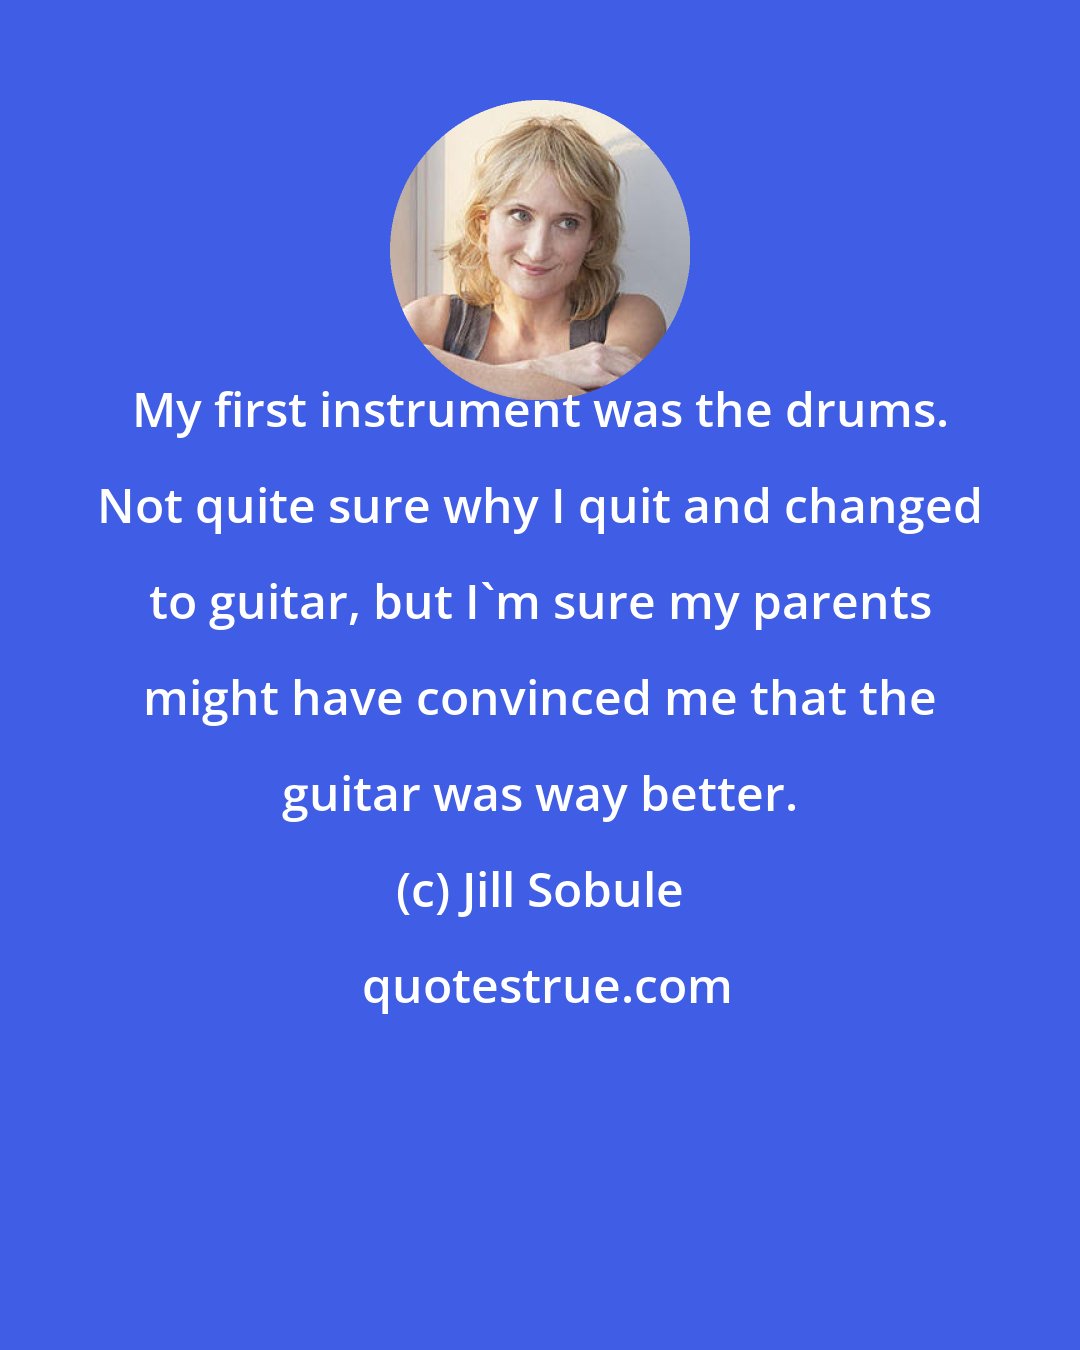 Jill Sobule: My first instrument was the drums. Not quite sure why I quit and changed to guitar, but I'm sure my parents might have convinced me that the guitar was way better.